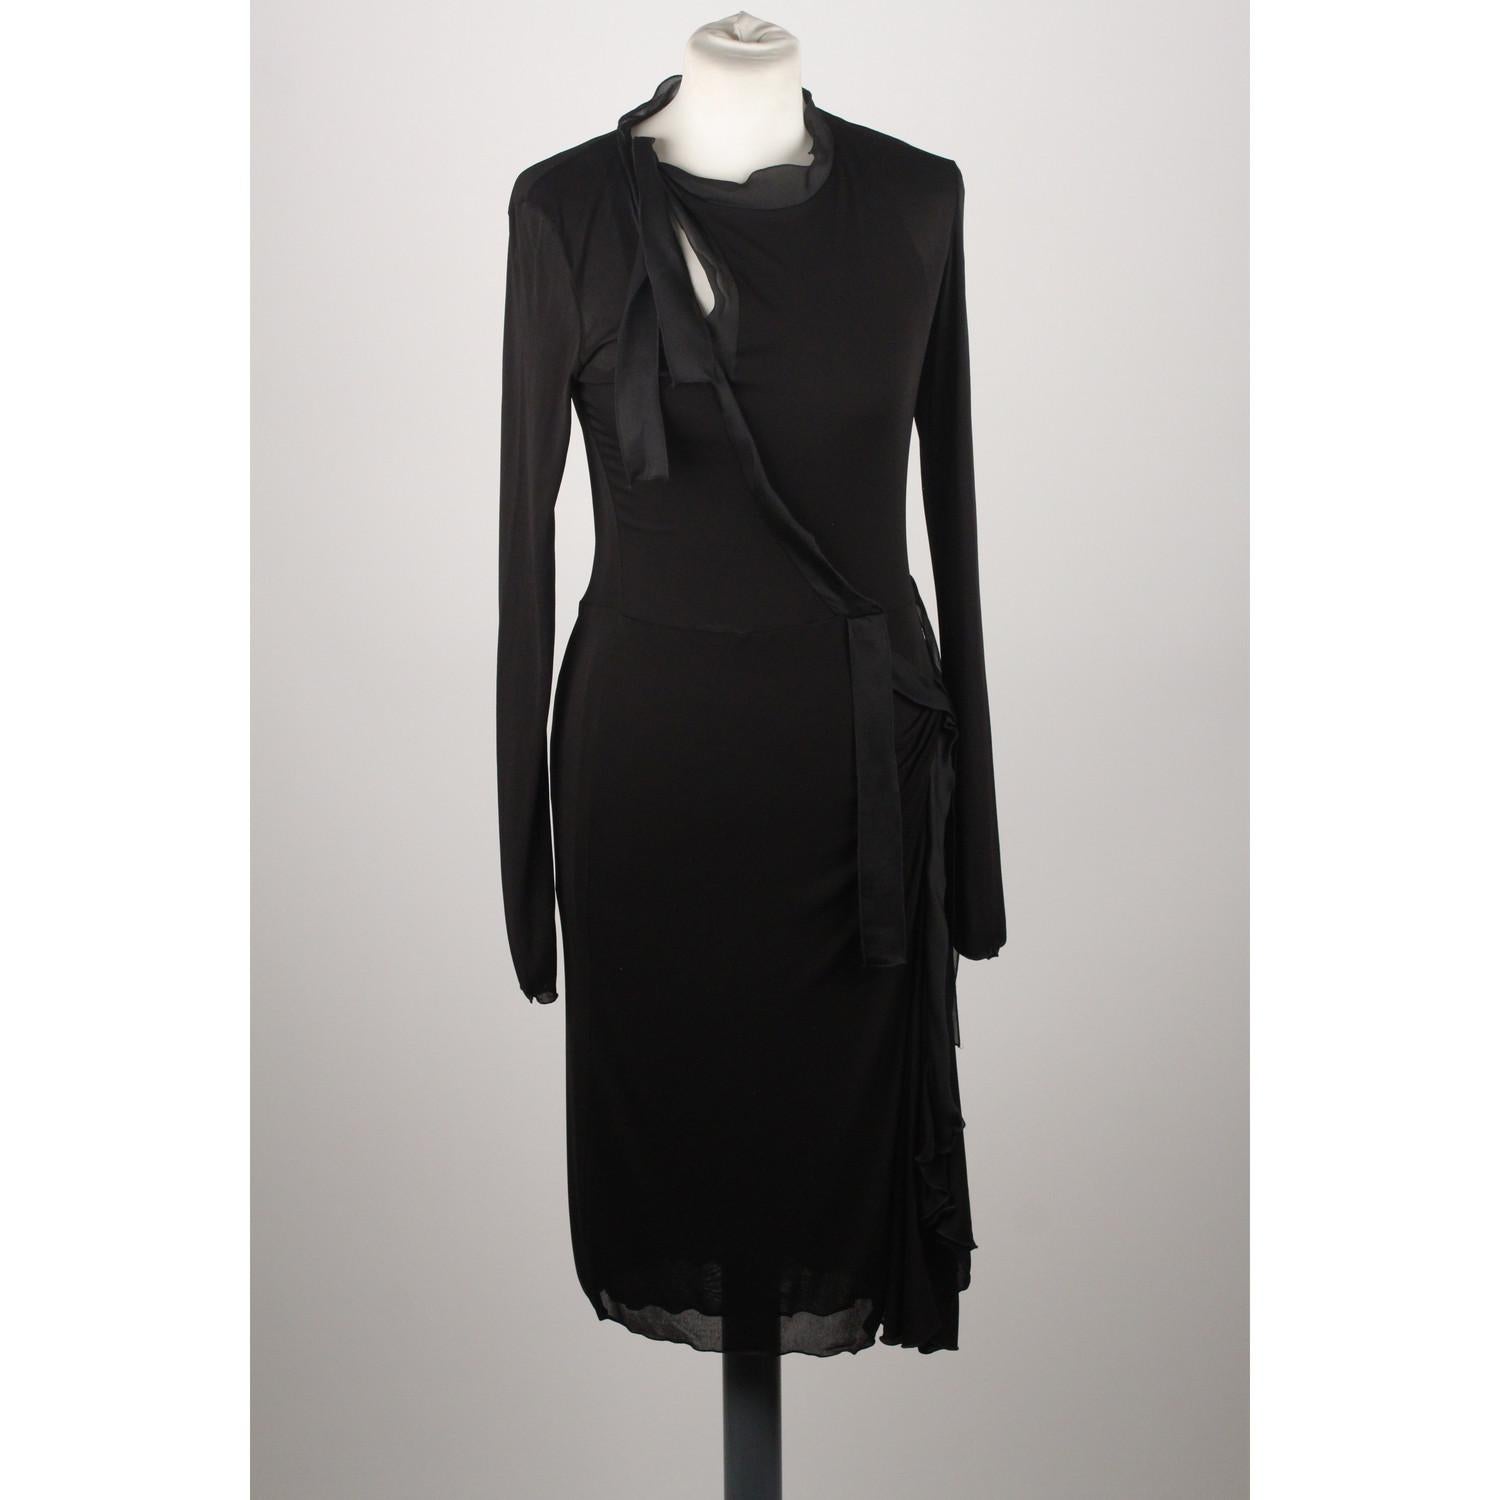 - Yves Saint Laurent Rive Gauche - Made in France  
- Black color 
- Composition: 100% Viscose
- Long sleeve styling
-  Wrap design 
- Side zip closure
- Size :  SMALL (The size shown for this item is the size indicated by the designer on the label).